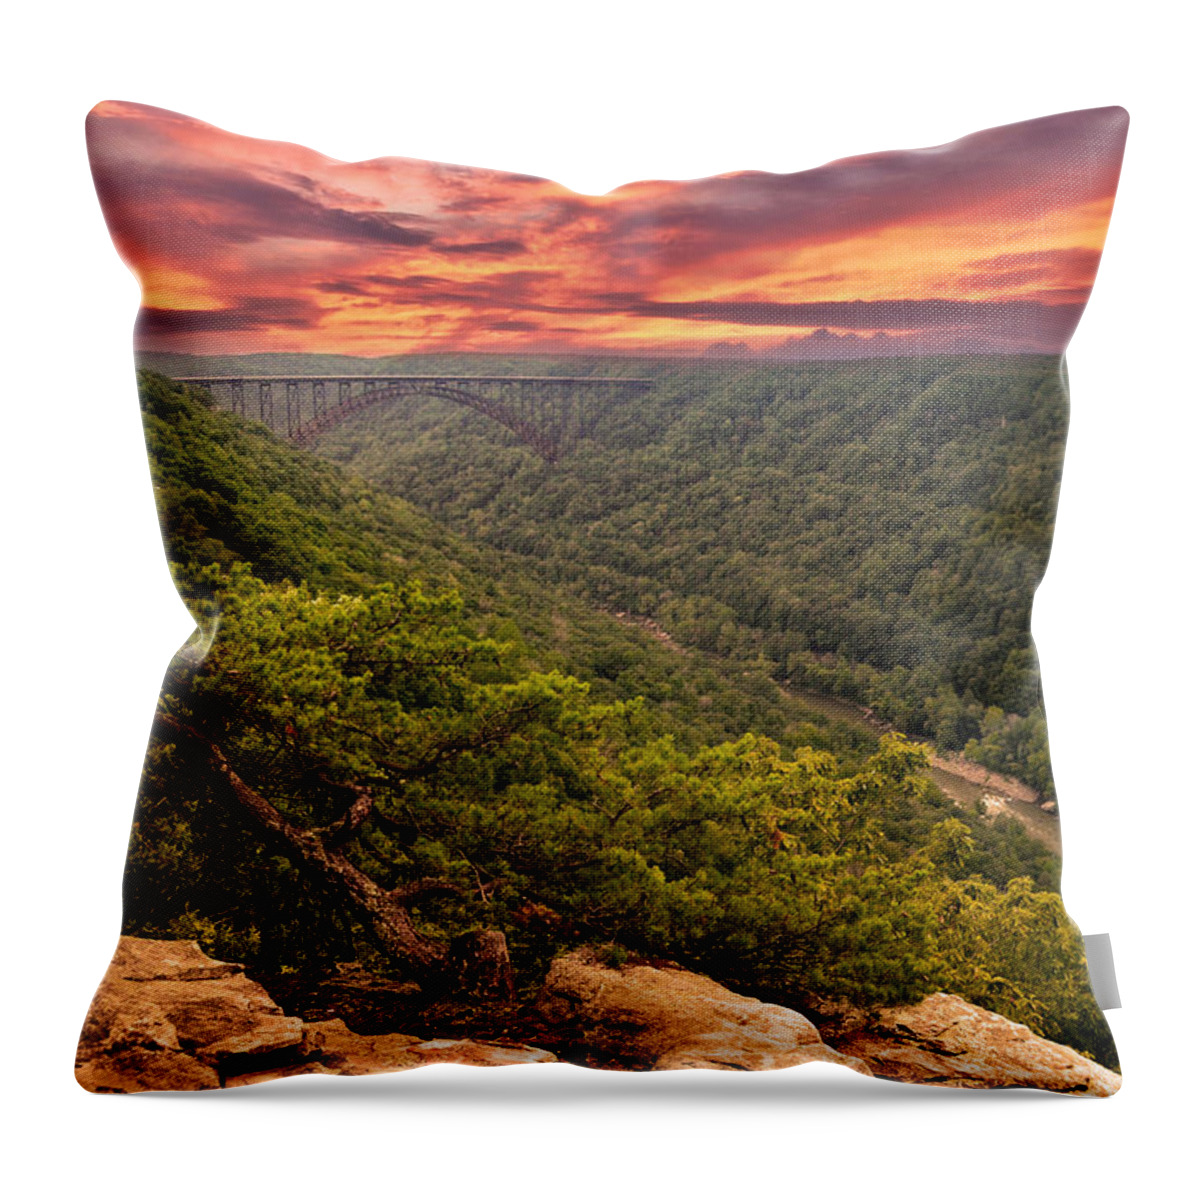  Throw Pillow featuring the photograph The Gorge by Lisa Lambert-Shank